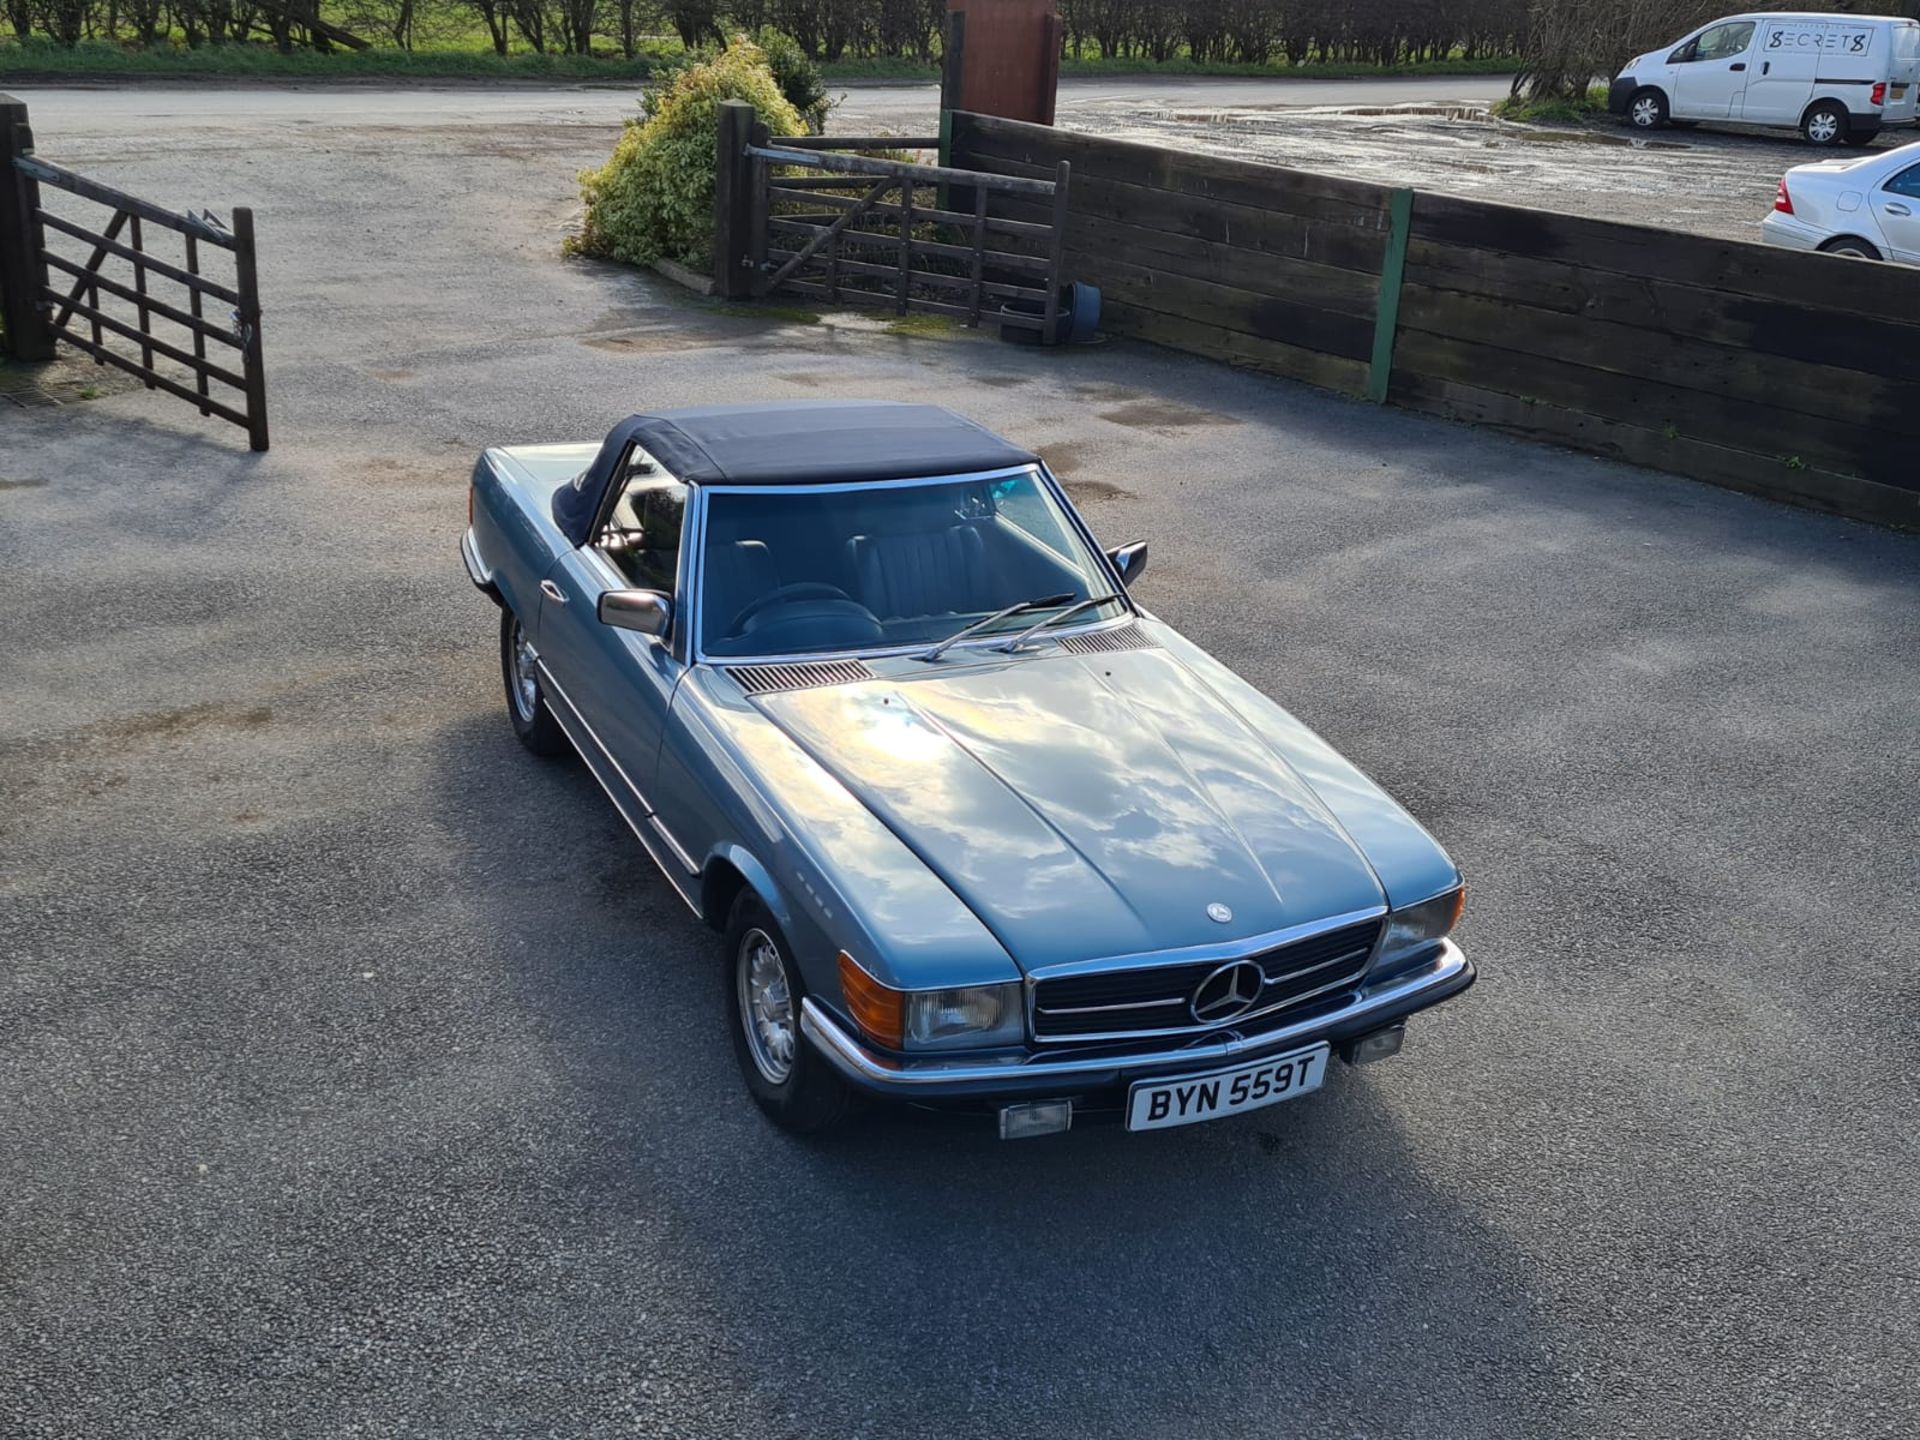 Stunning 1979 Mercedes Benz SL350 V8 With Factory Hardtop - Restored in 2018 - Image 14 of 22